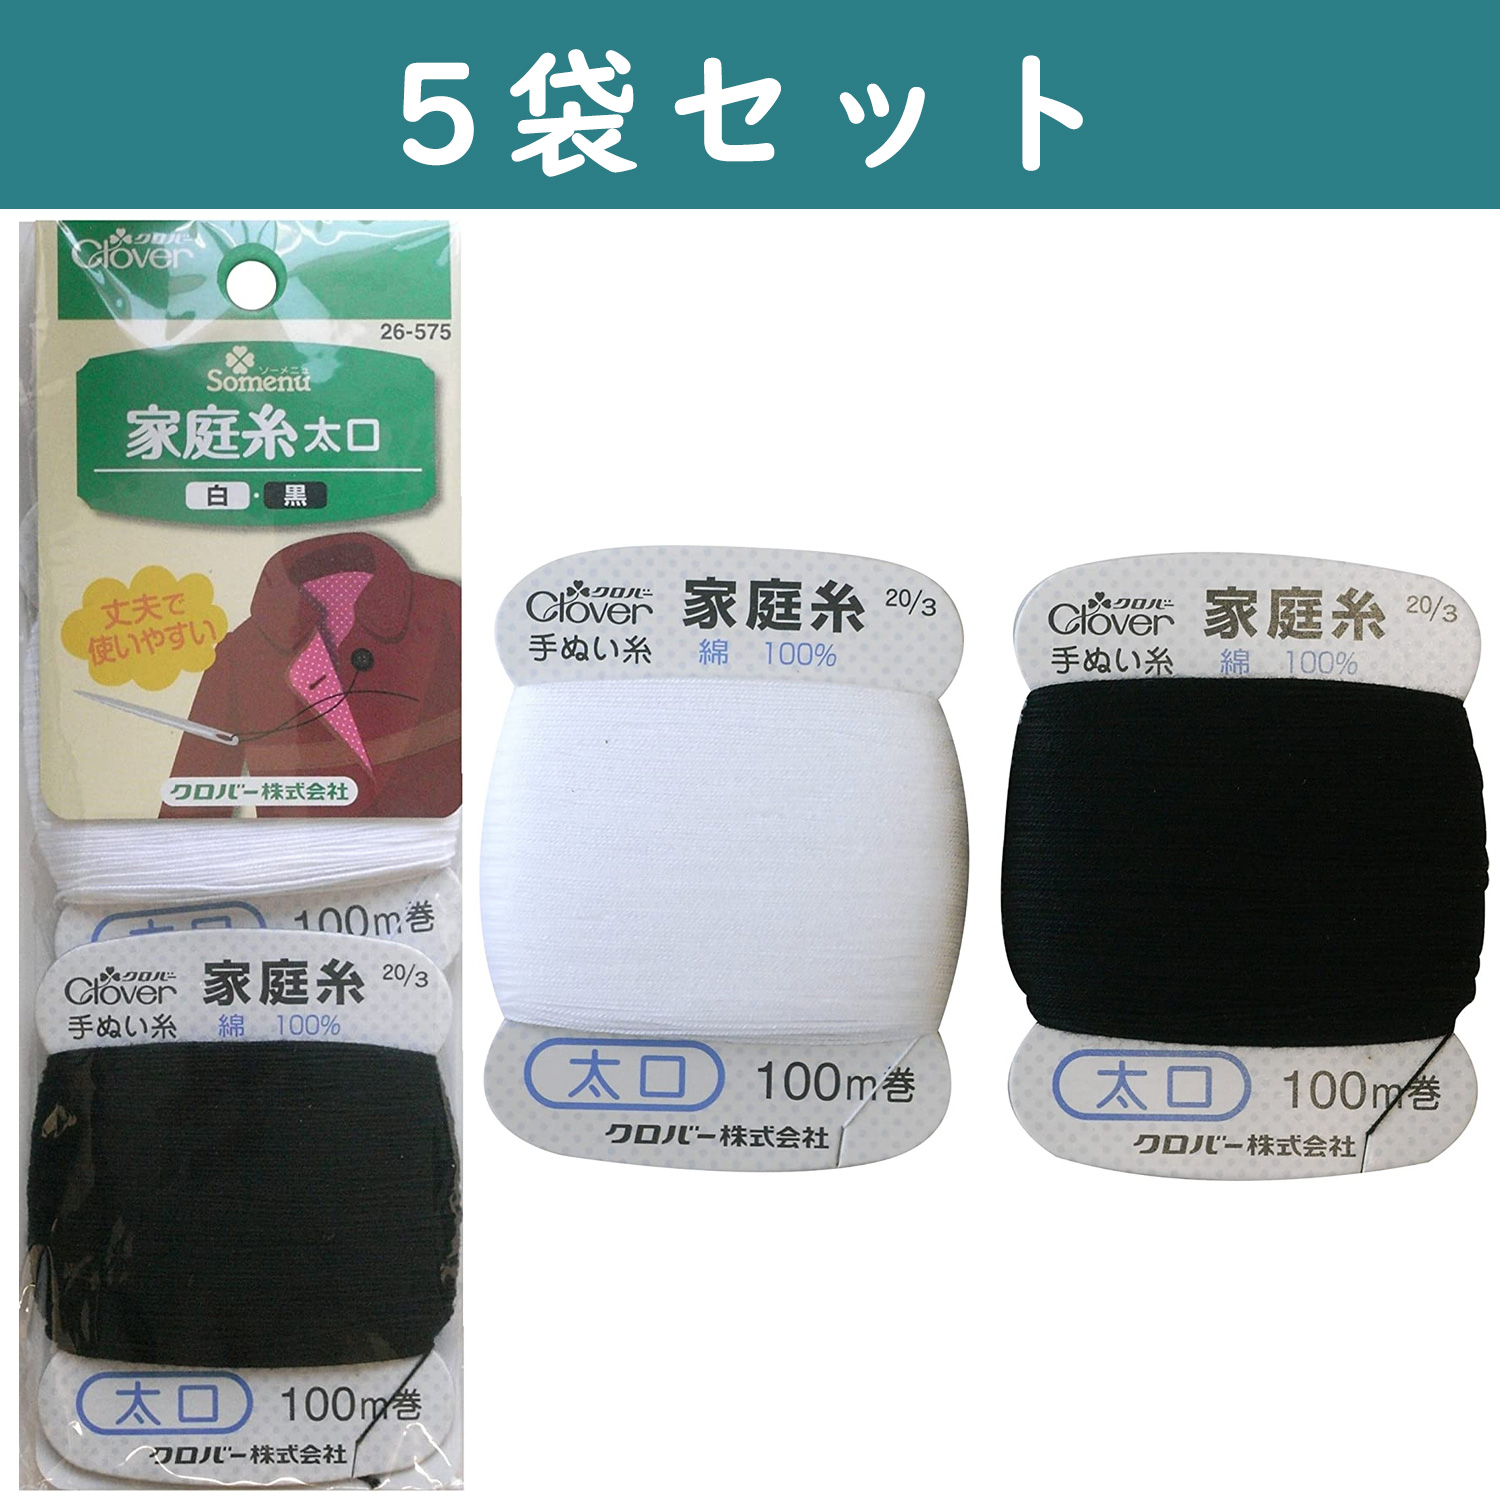 ■CL26-575-5set Clover Hand Sewing Thread Thick 100m roll, 1pcs each for Black and White/pack　×5pack　(set)